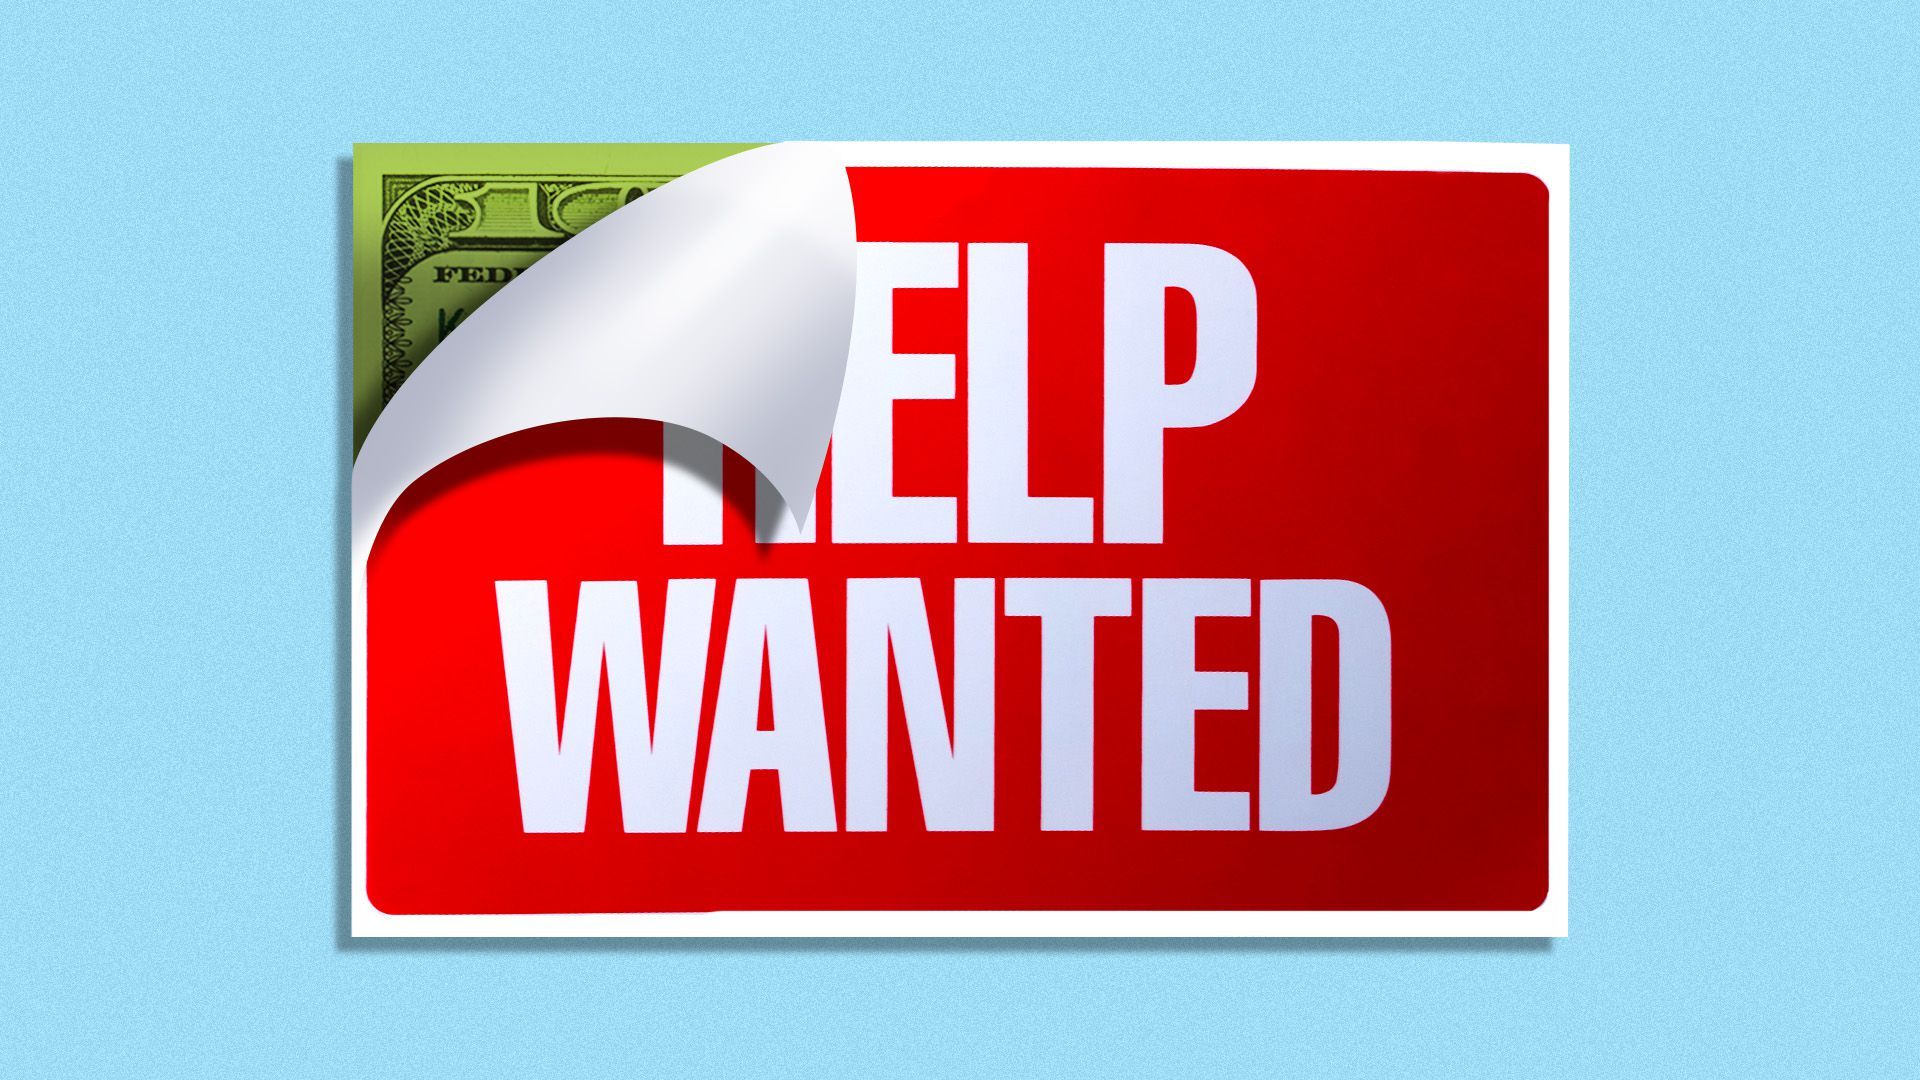 Illustration of a hundred dollar bill being revealed behind a help wanted sign